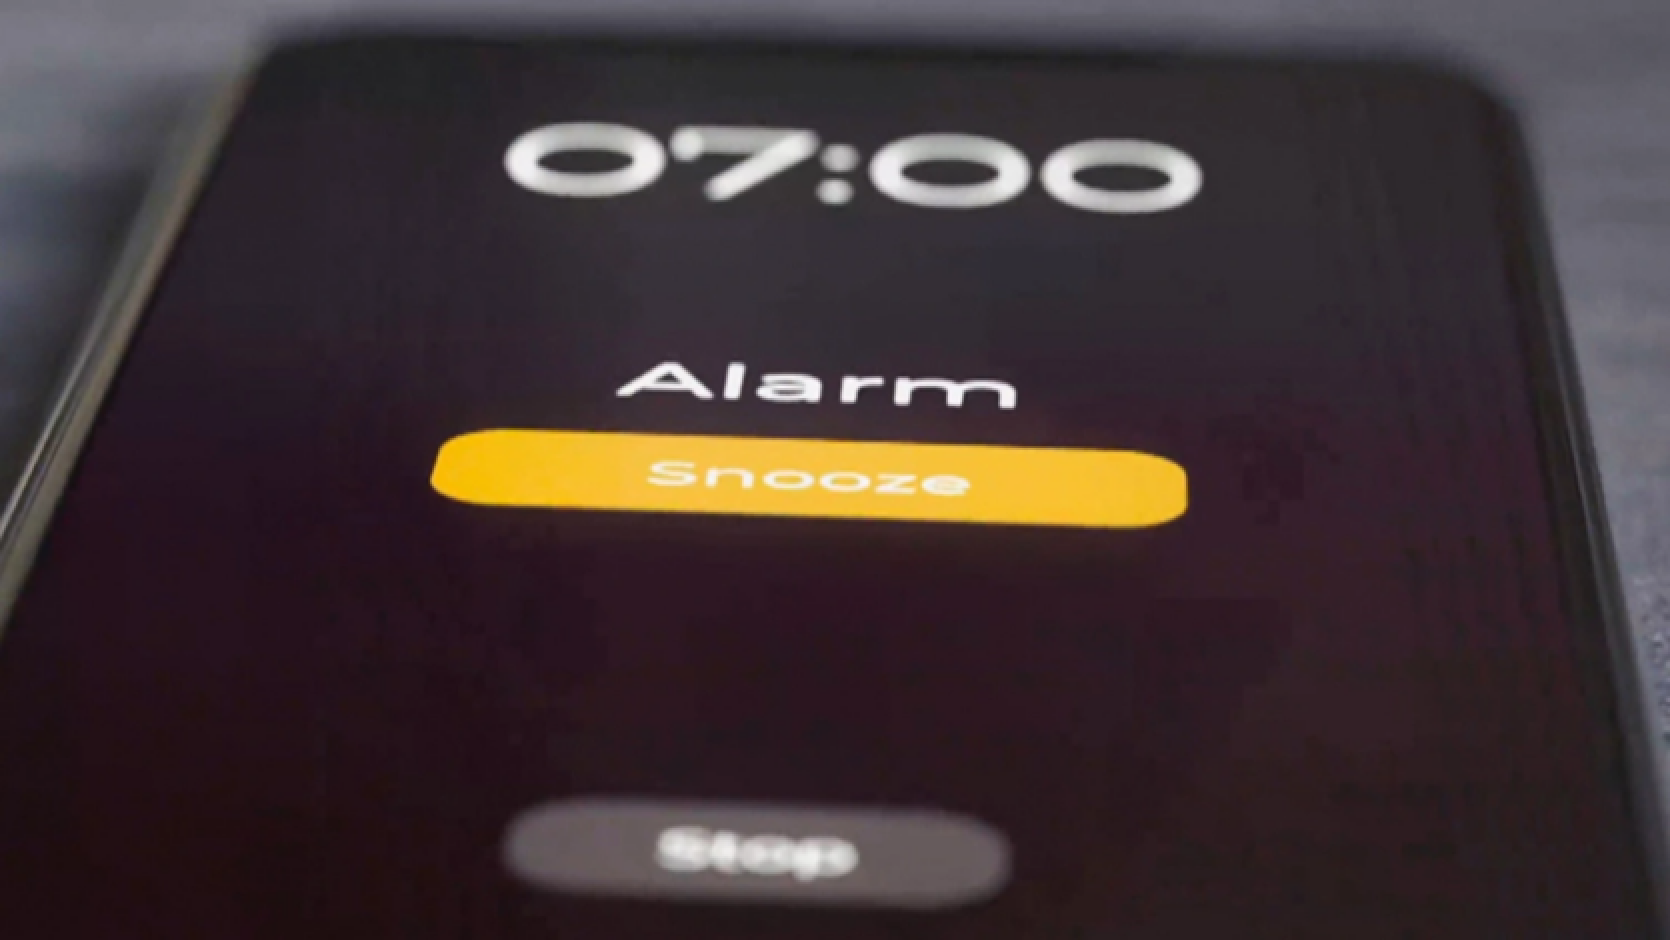 If you oversleep, blame Apple. "Quiet" iPhone alarm clocks will be fixed through iOS update after mass complaints